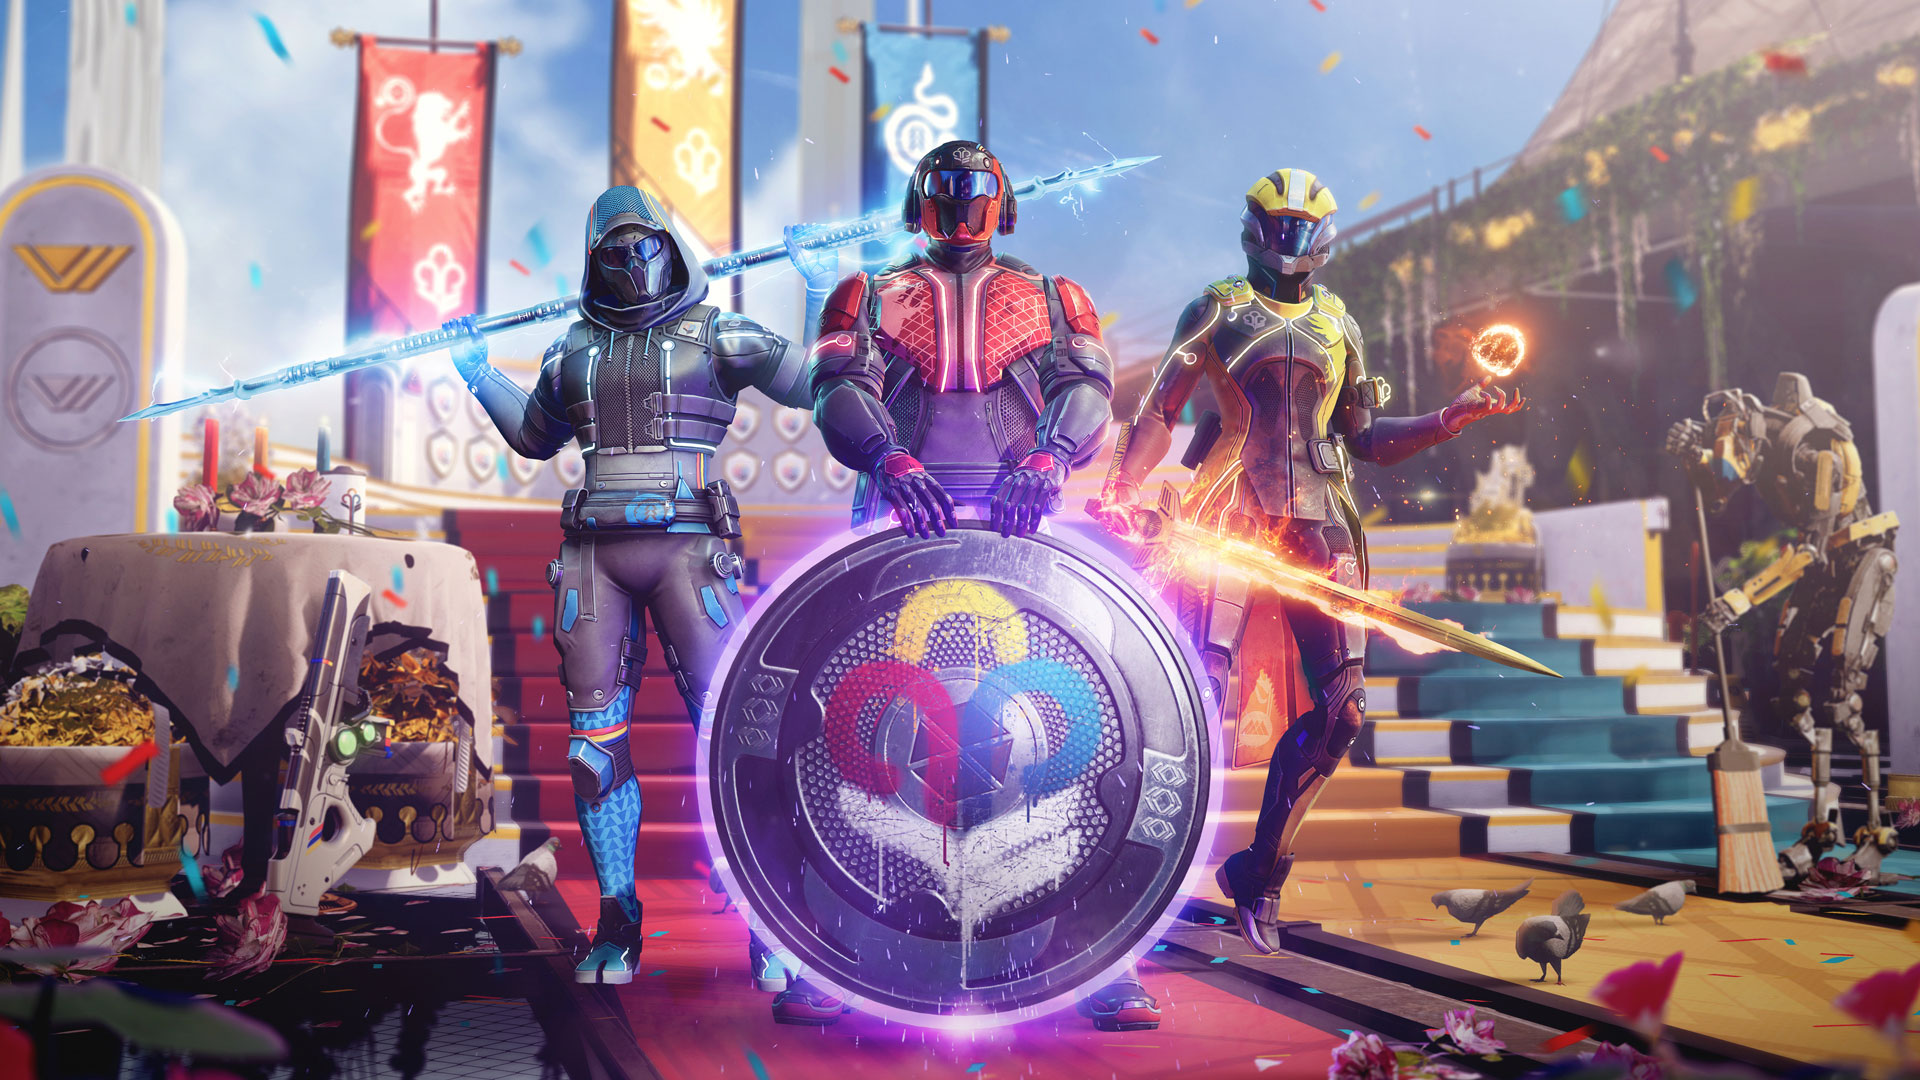 Guardian Games Return: Compete for Glory and Rewards in Destiny 2’s Annual Event